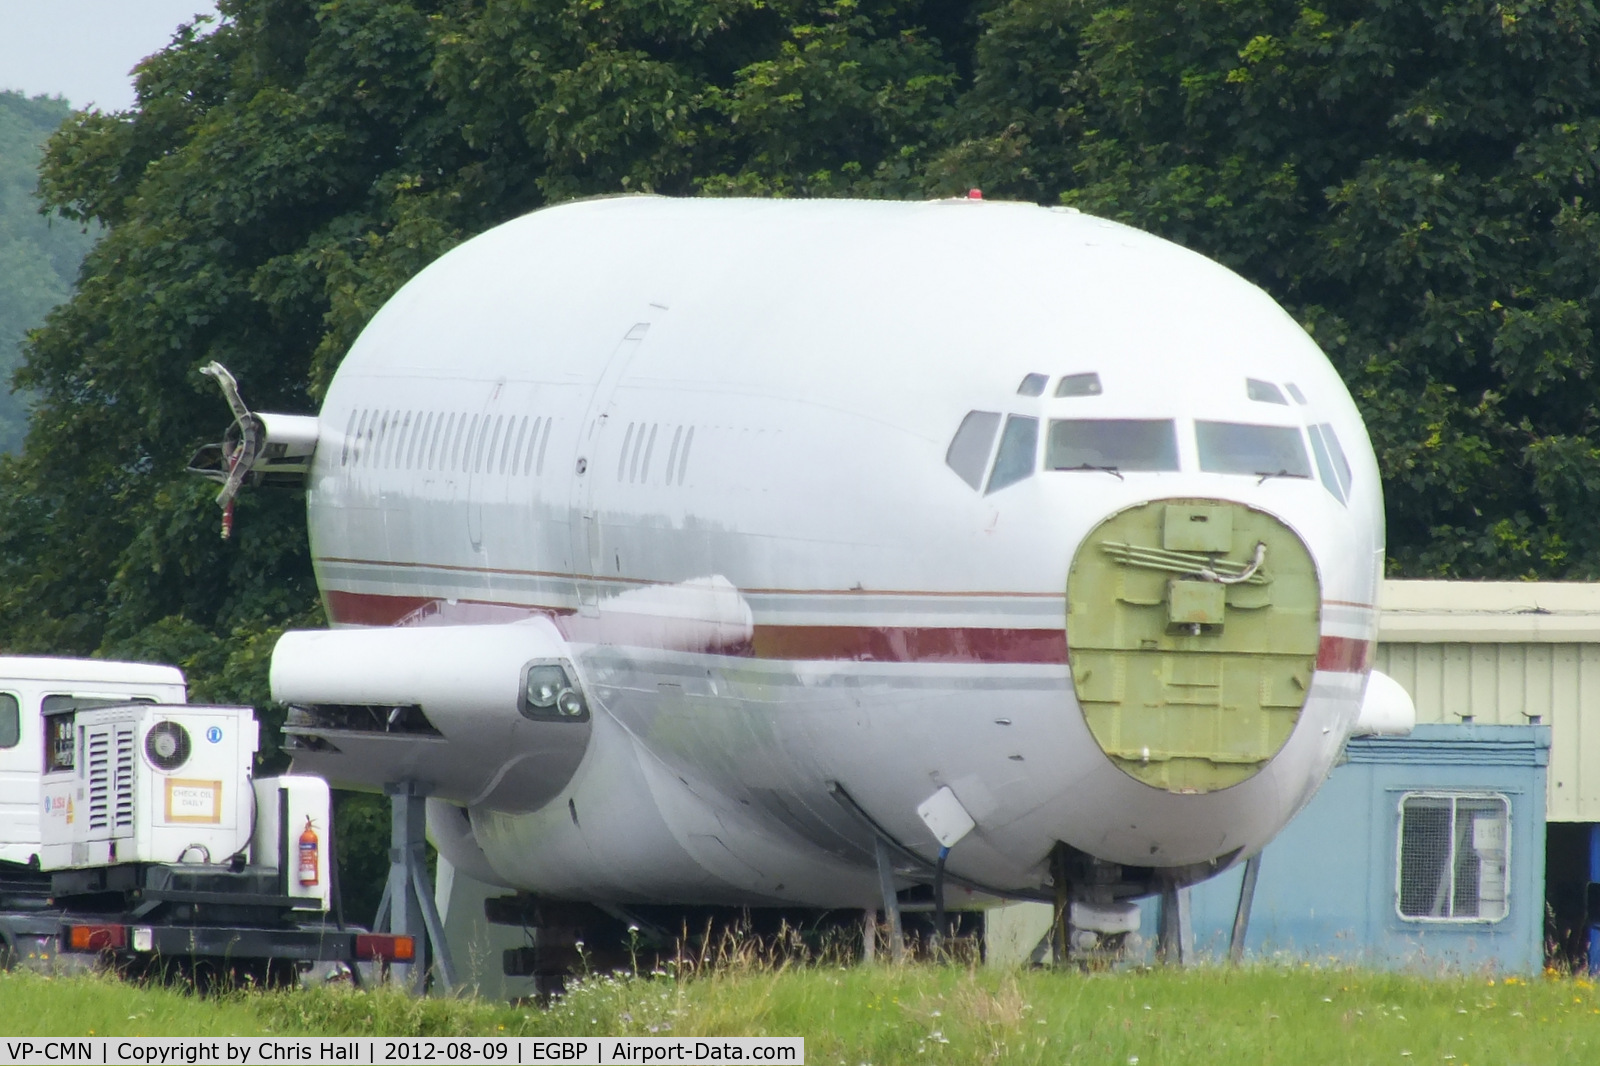 VP-CMN, 1967 Boeing 727-46 C/N 19282, in the scrapping area at Kemble